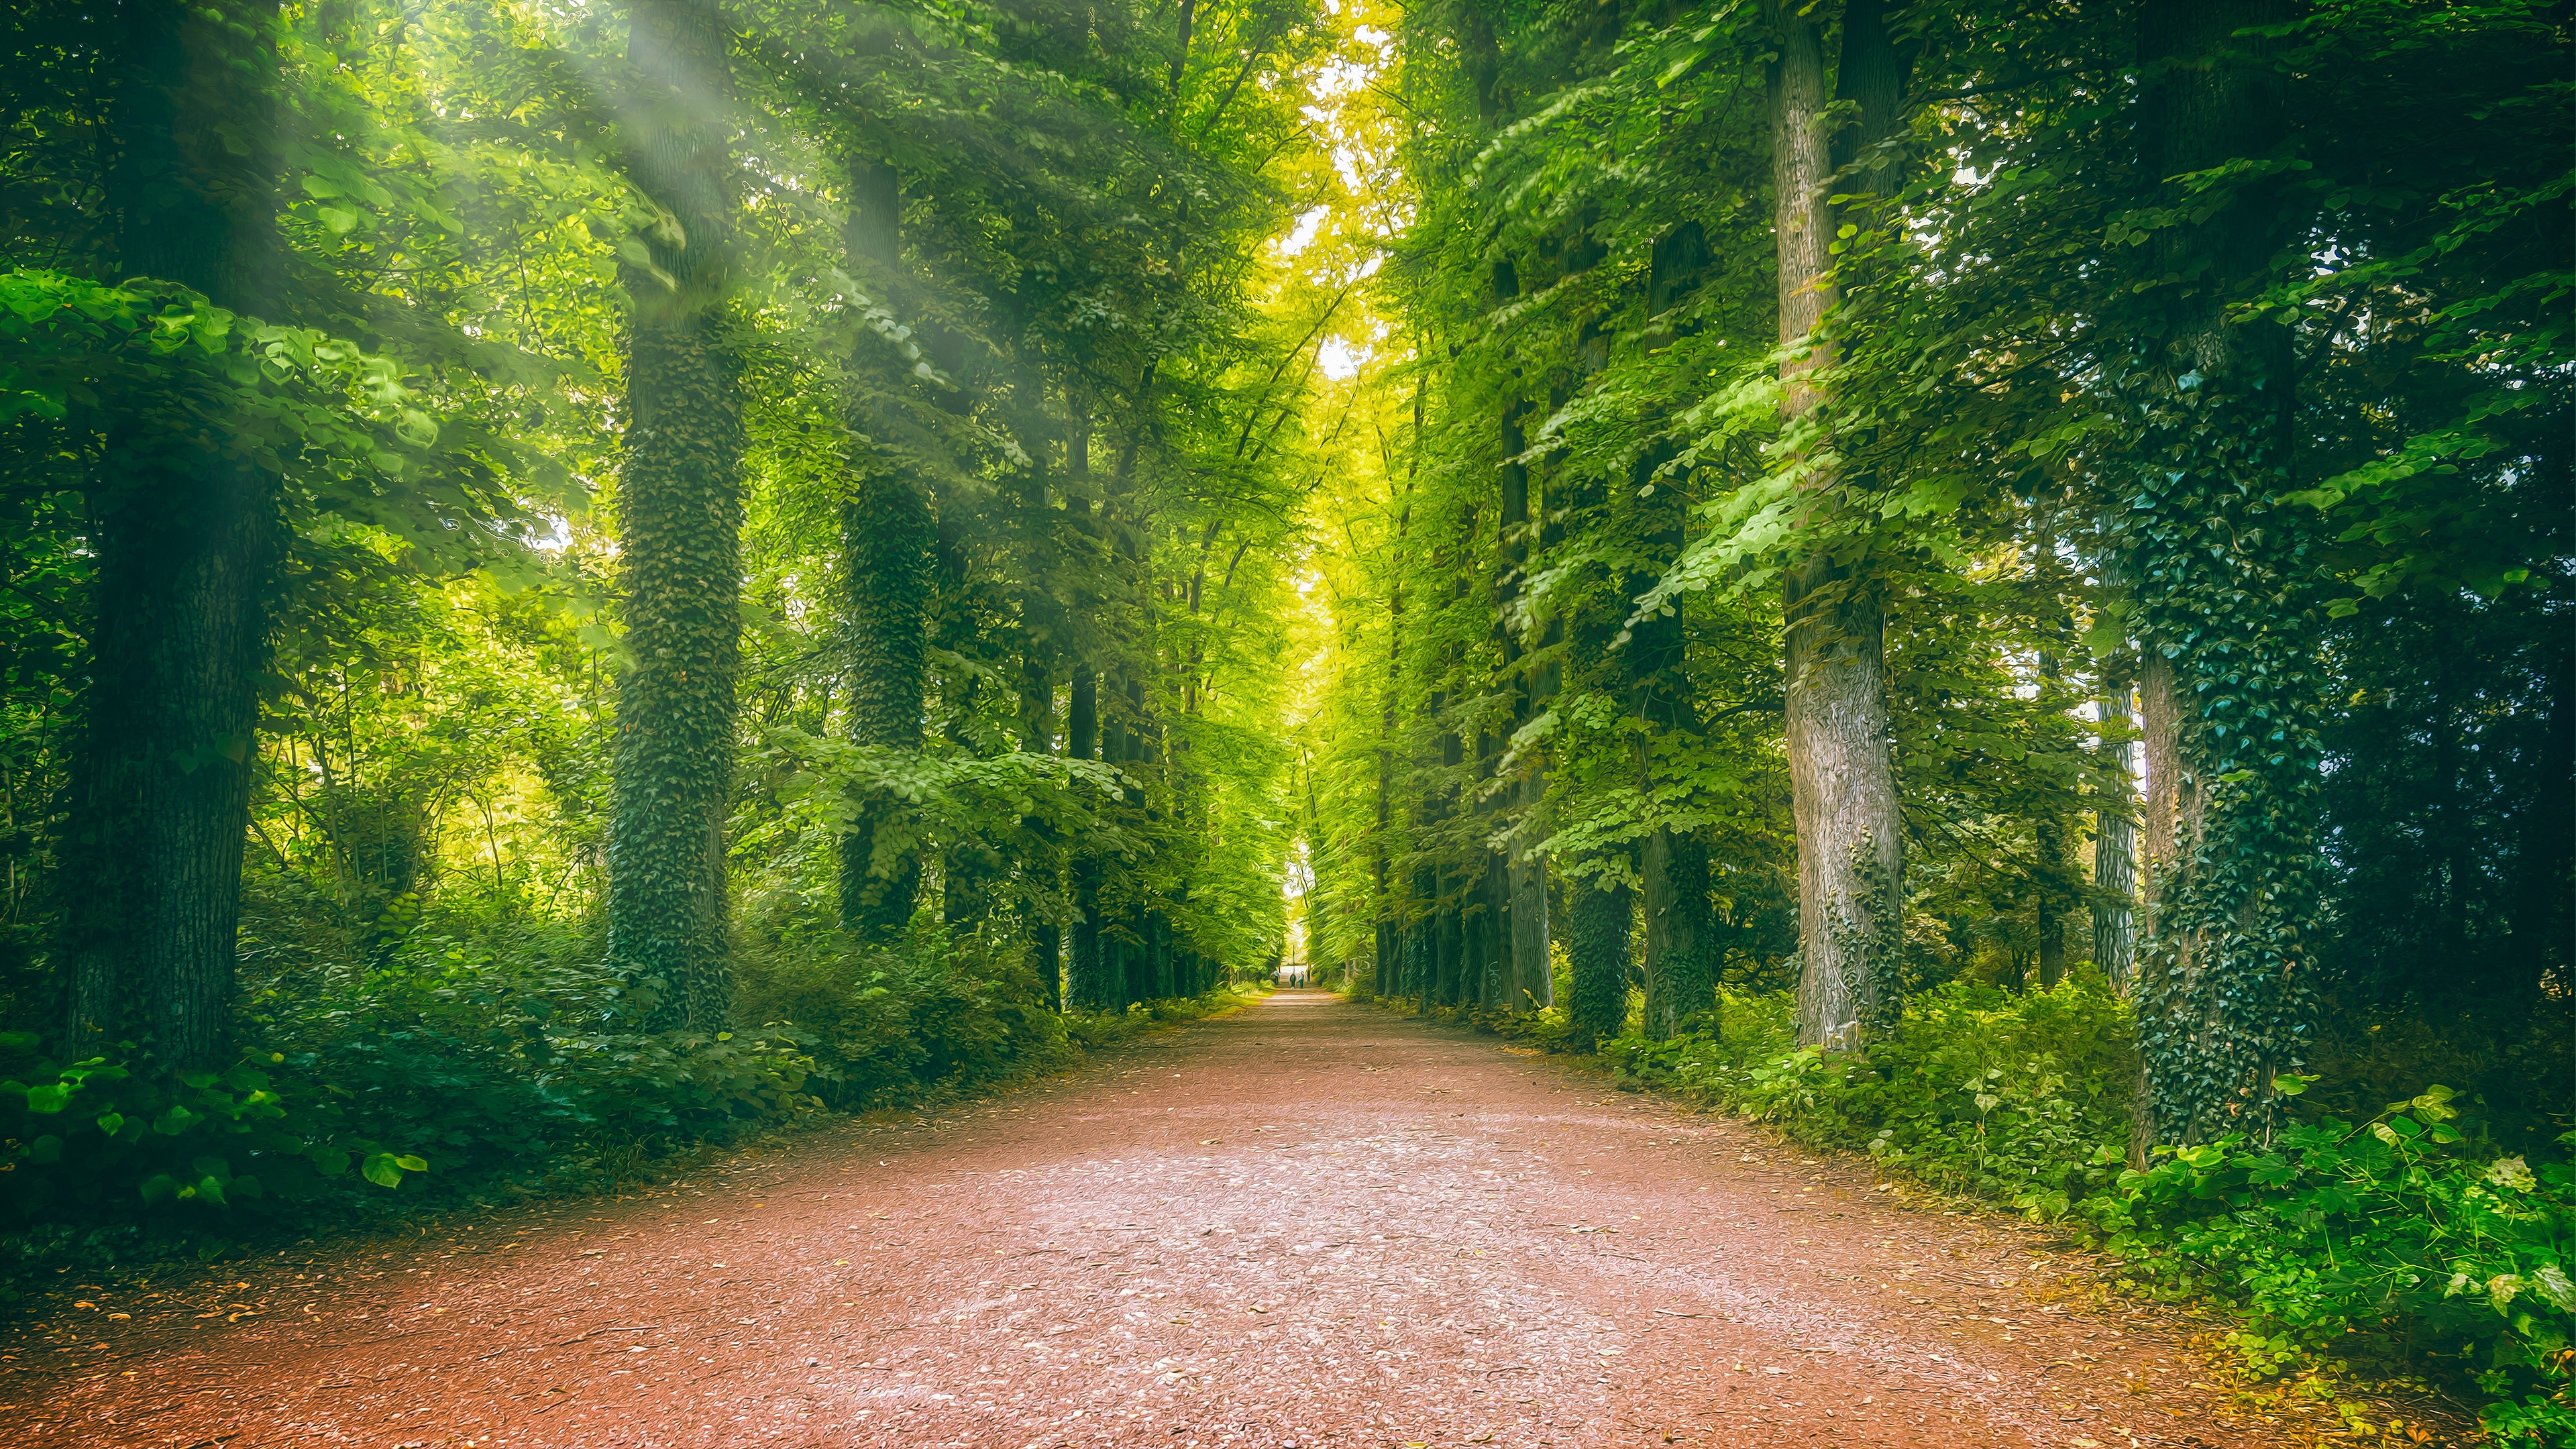 road, man made, forest, greenery, ivy, trunk